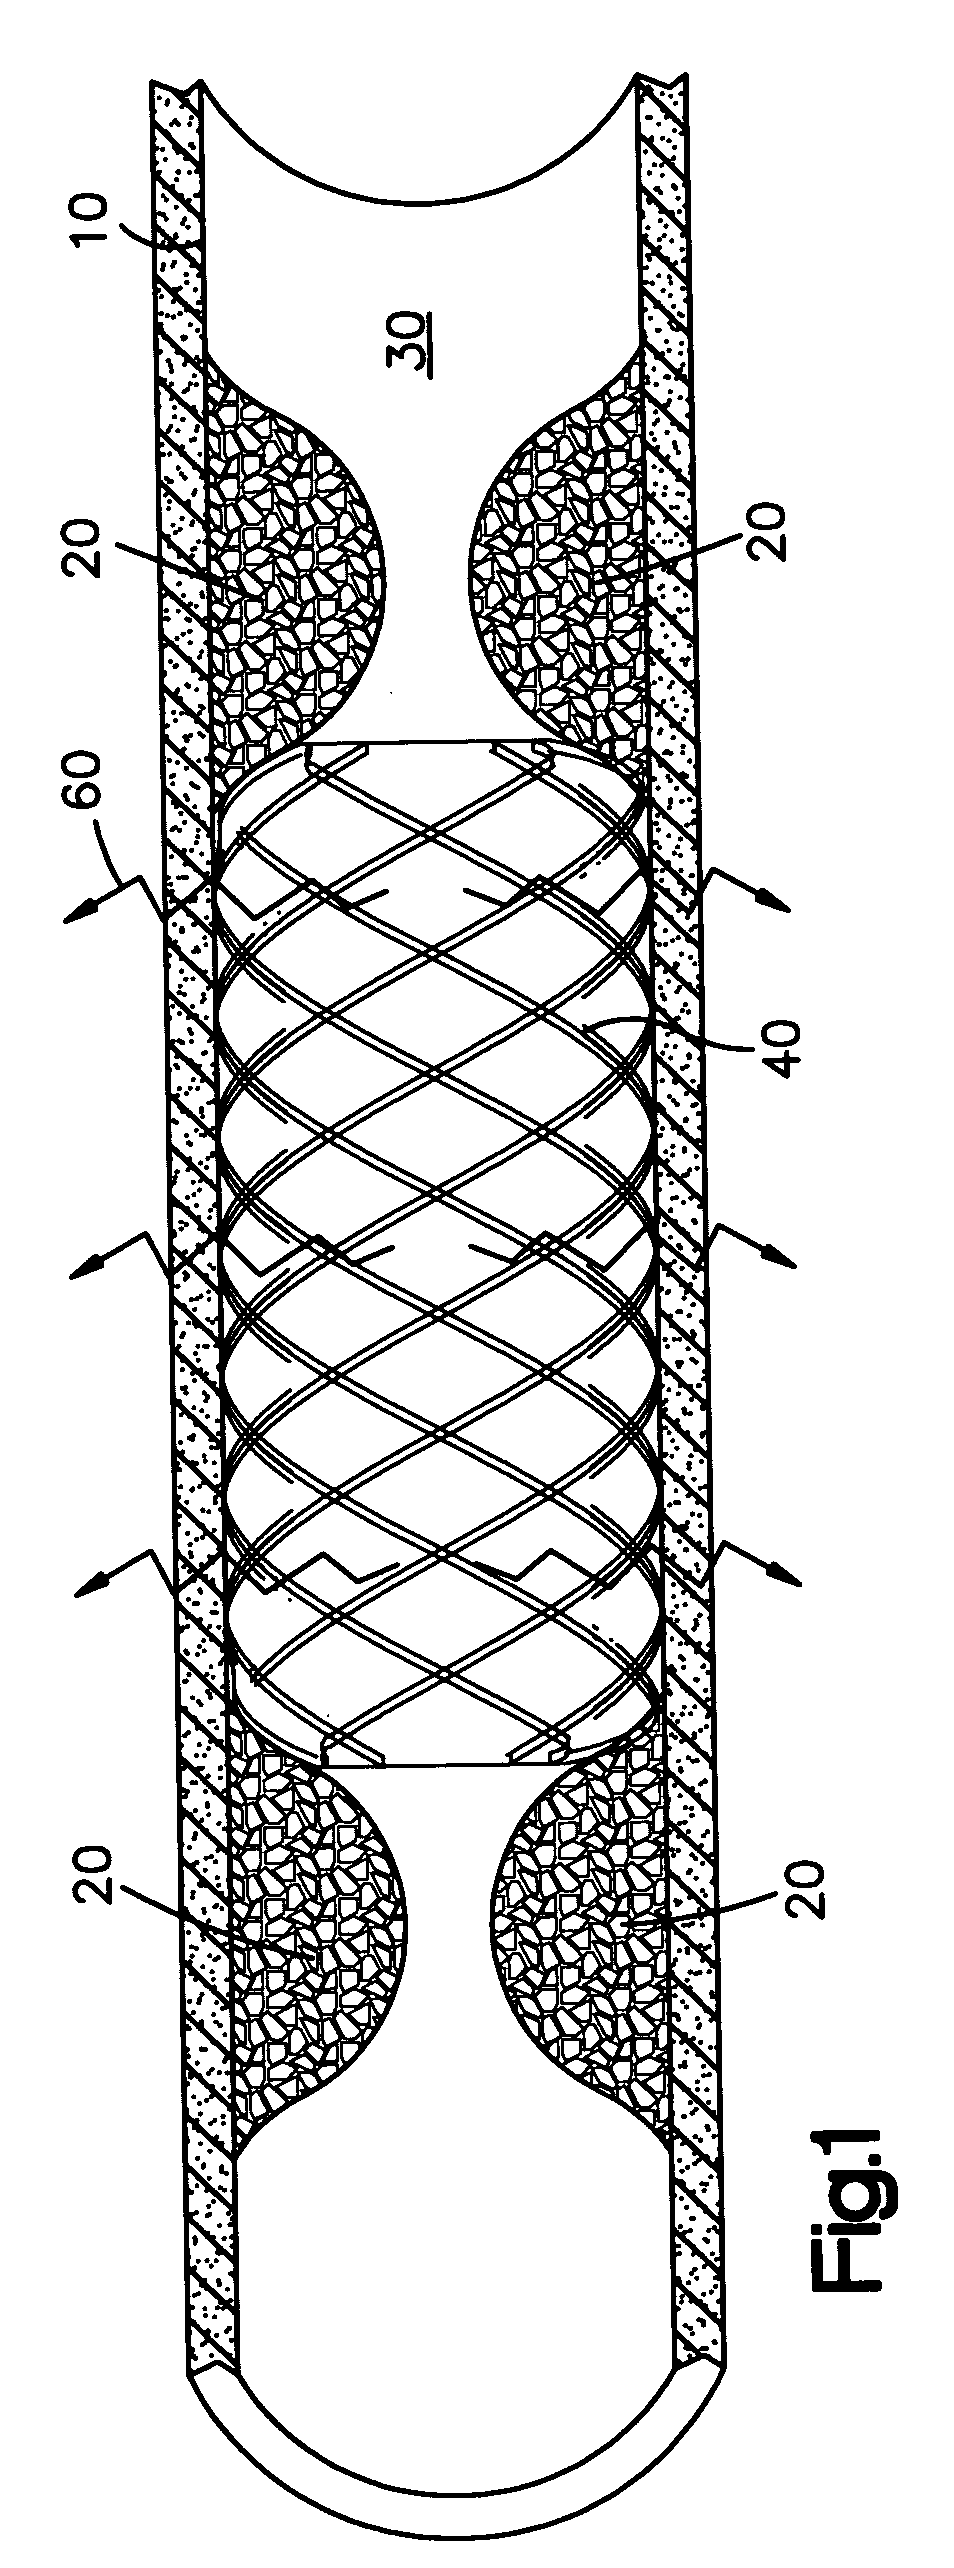 System for administering a combination of therapies to a body lumen